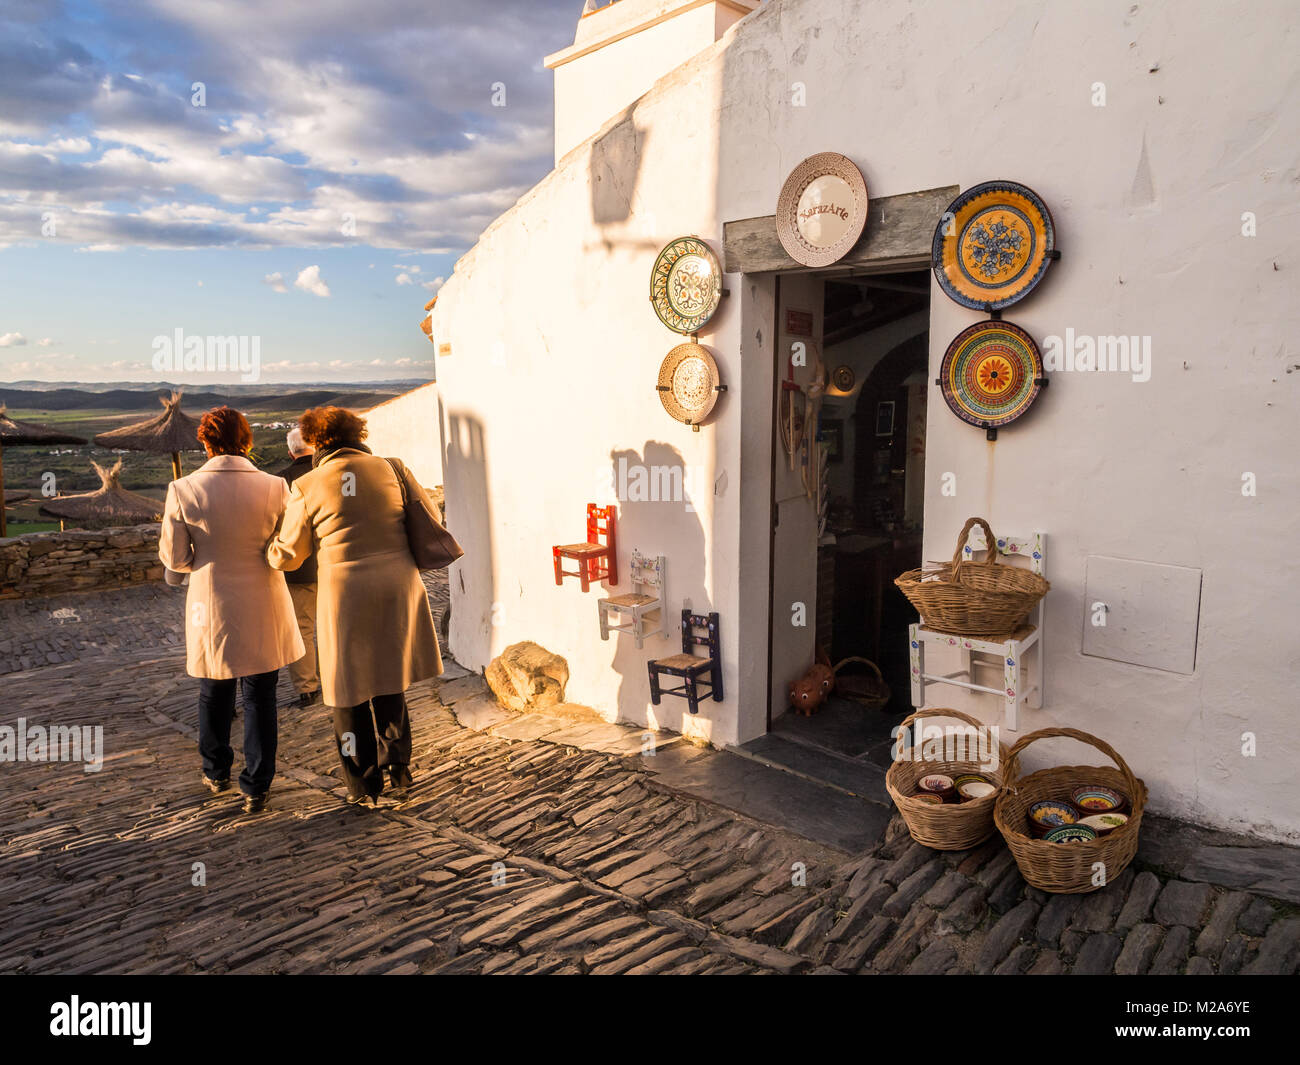 MONSARAZ, PORTUGAL - JANUARY 28, 2018: Small store with typical plates in Monsaraz in Alentejo region, Portugal, at sunset. Stock Photo